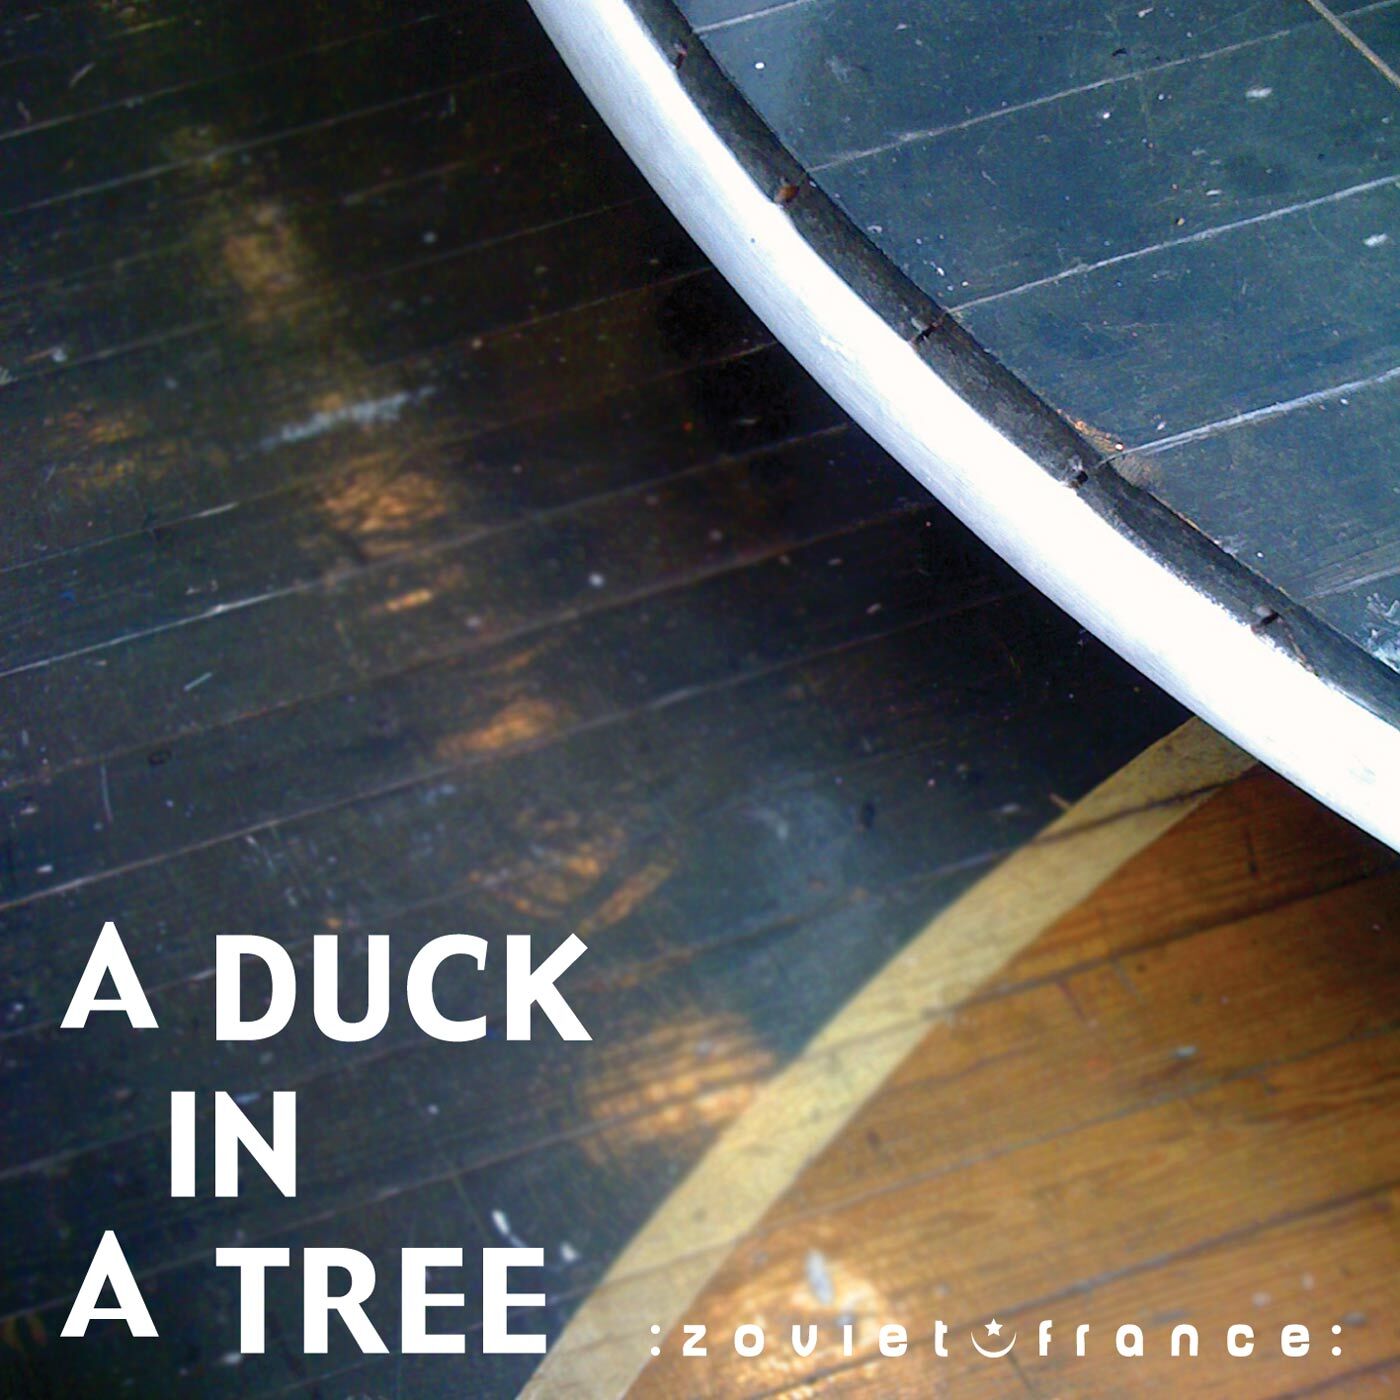 A-Duck-in-a-Tree-2013-04-06-_-Nowhere-Left-to-Burn-layout-1400.jpg